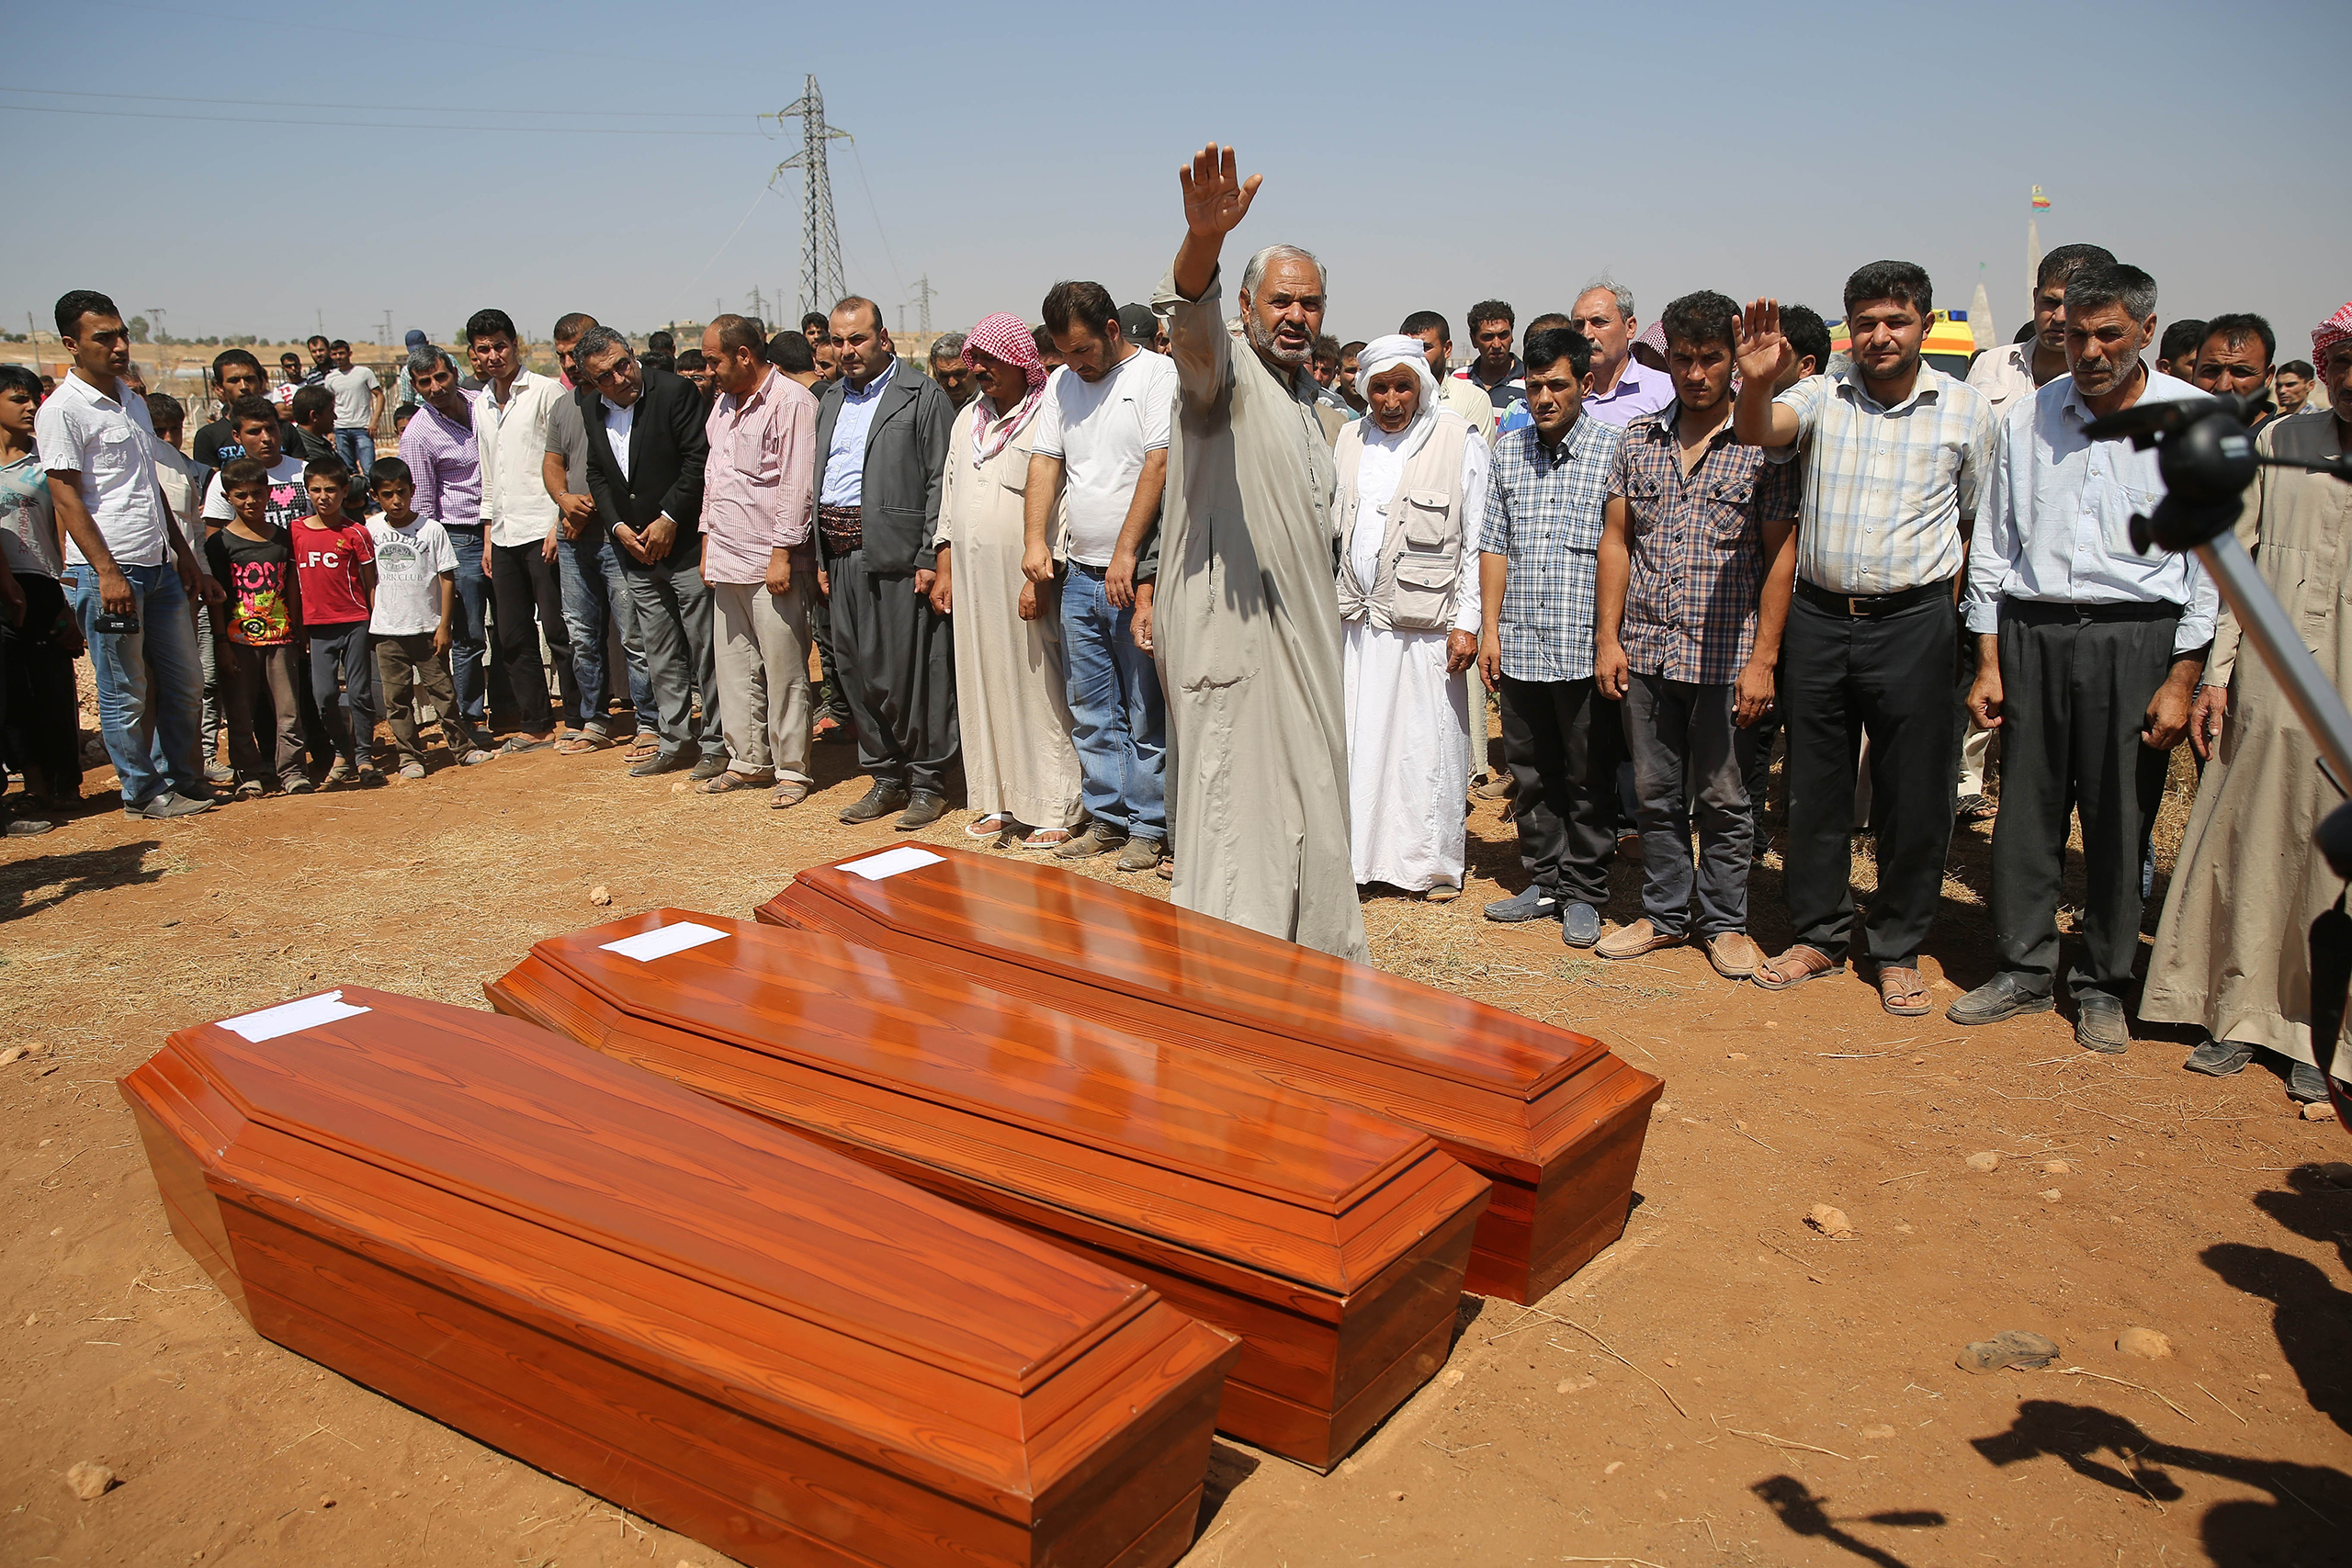 Relatives hold funeral of Syrian children Alan, 2, his brother Galip, 3, and husband of Zahin Kurdi, 27, who drowned after their boat sank en route to the Greek islands in the Aegean Sea, in the Syrian border town of Kobani (Ayn al-Arab) on Sept. 4, 2015. (Isa Terli—Anadolu Agency/Getty Images)